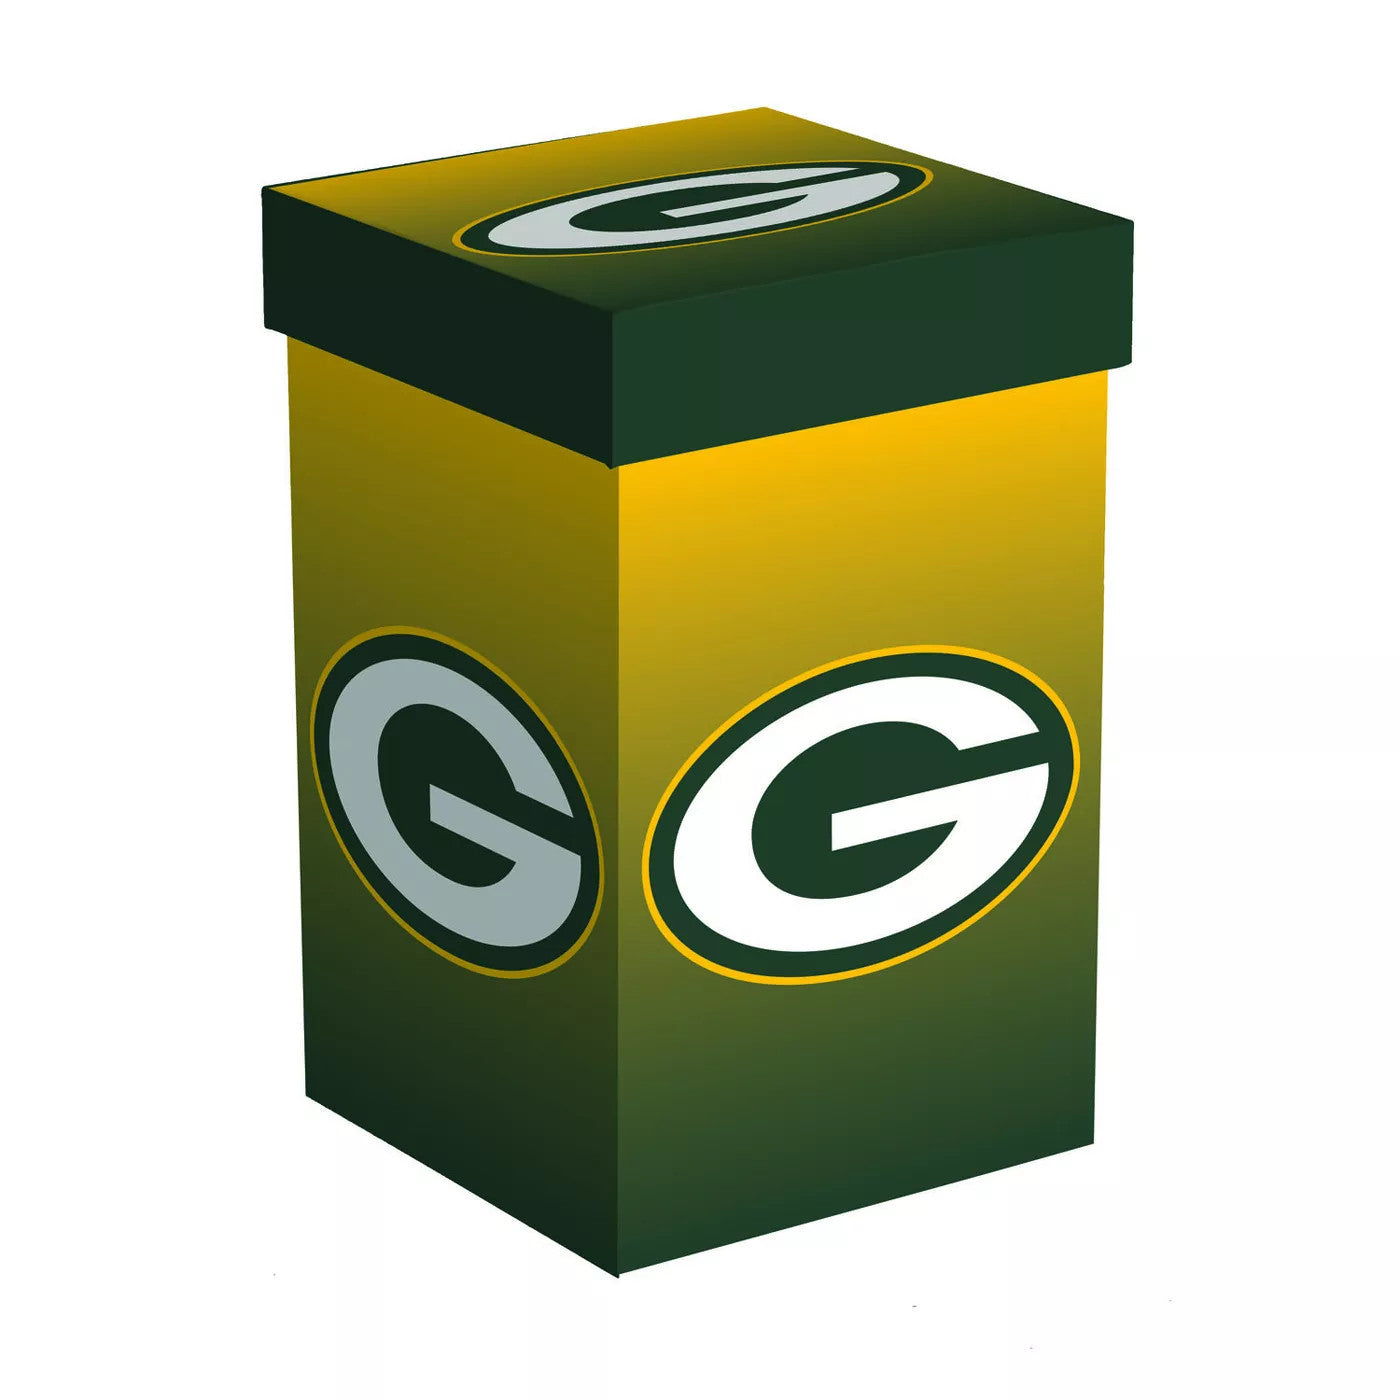 GREEN BAY PACKERS BOXED TRAVEL LATTE